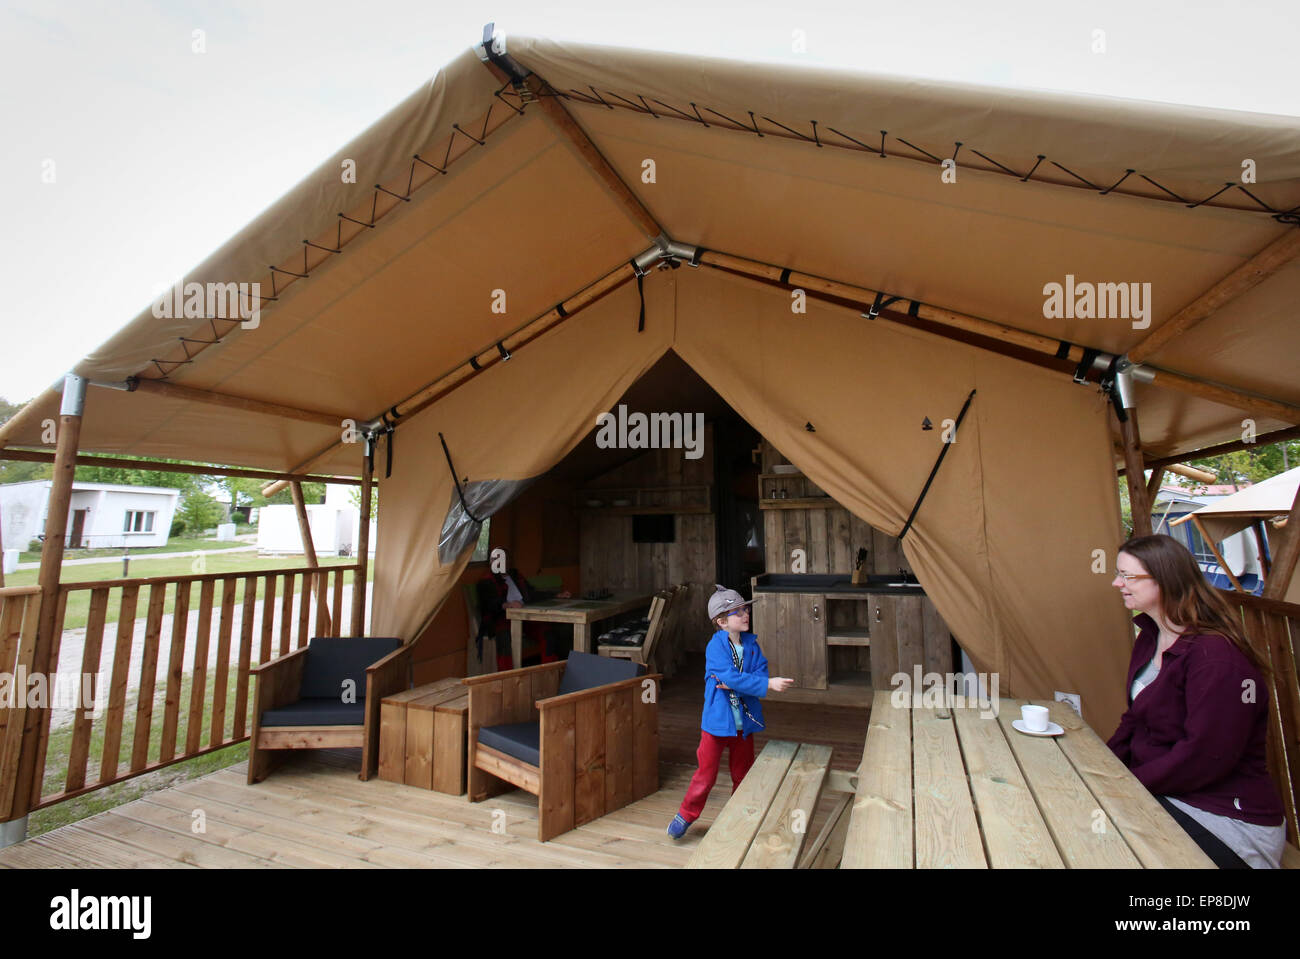 Rerik, Germany. 13th May, 2015. Guests look at a 'Glamping' tent at the  Rerik Campground on the Baltic Sea in Rerik, Germany, 13 May 2015. Glamping  - glamourous camping - is a